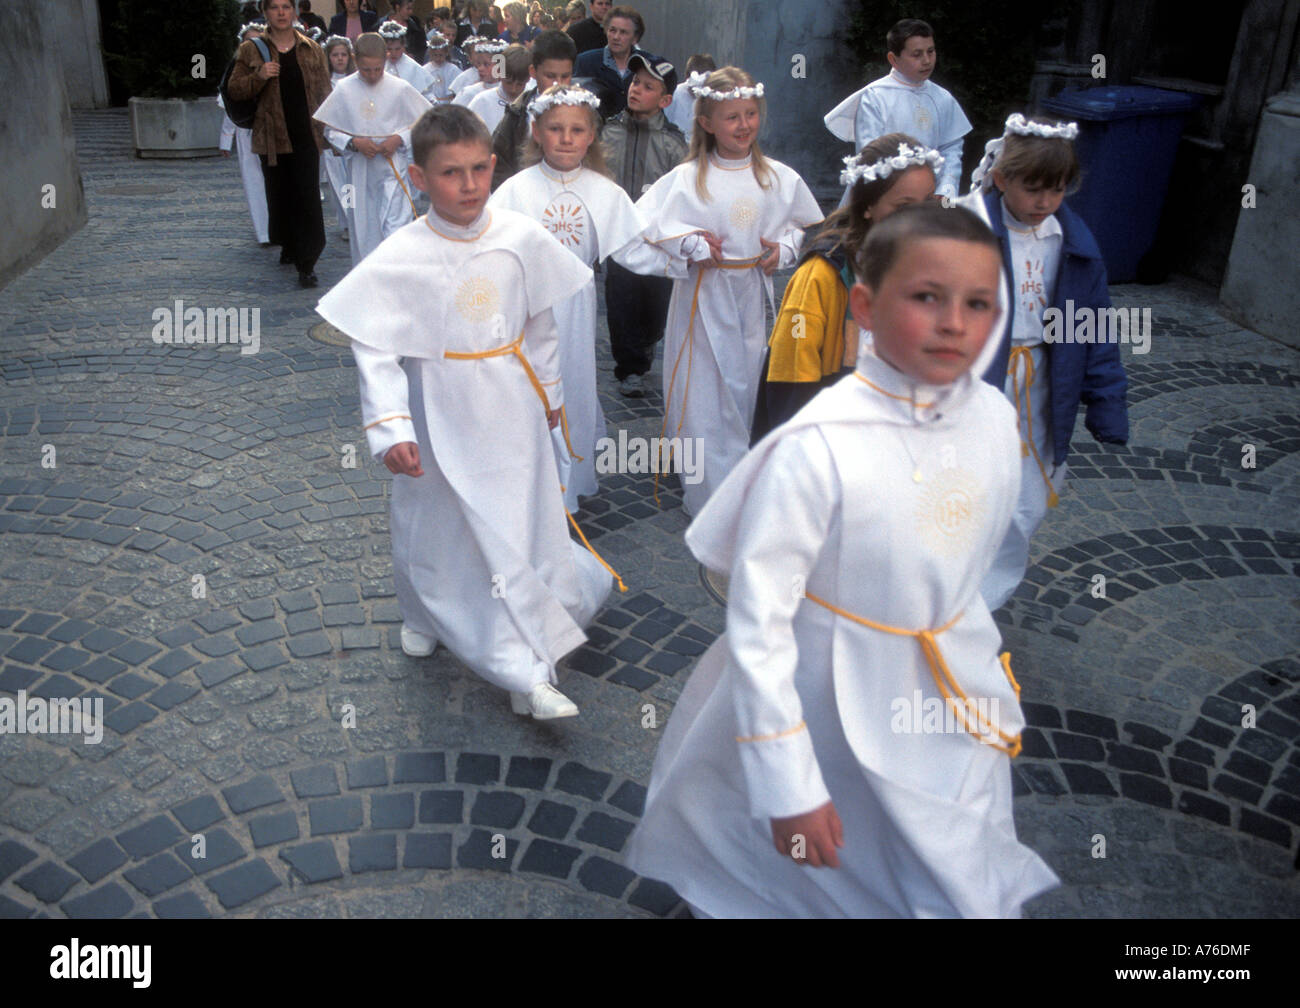 Confirmation Clothes High Resolution Stock Photography and Images - Alamy